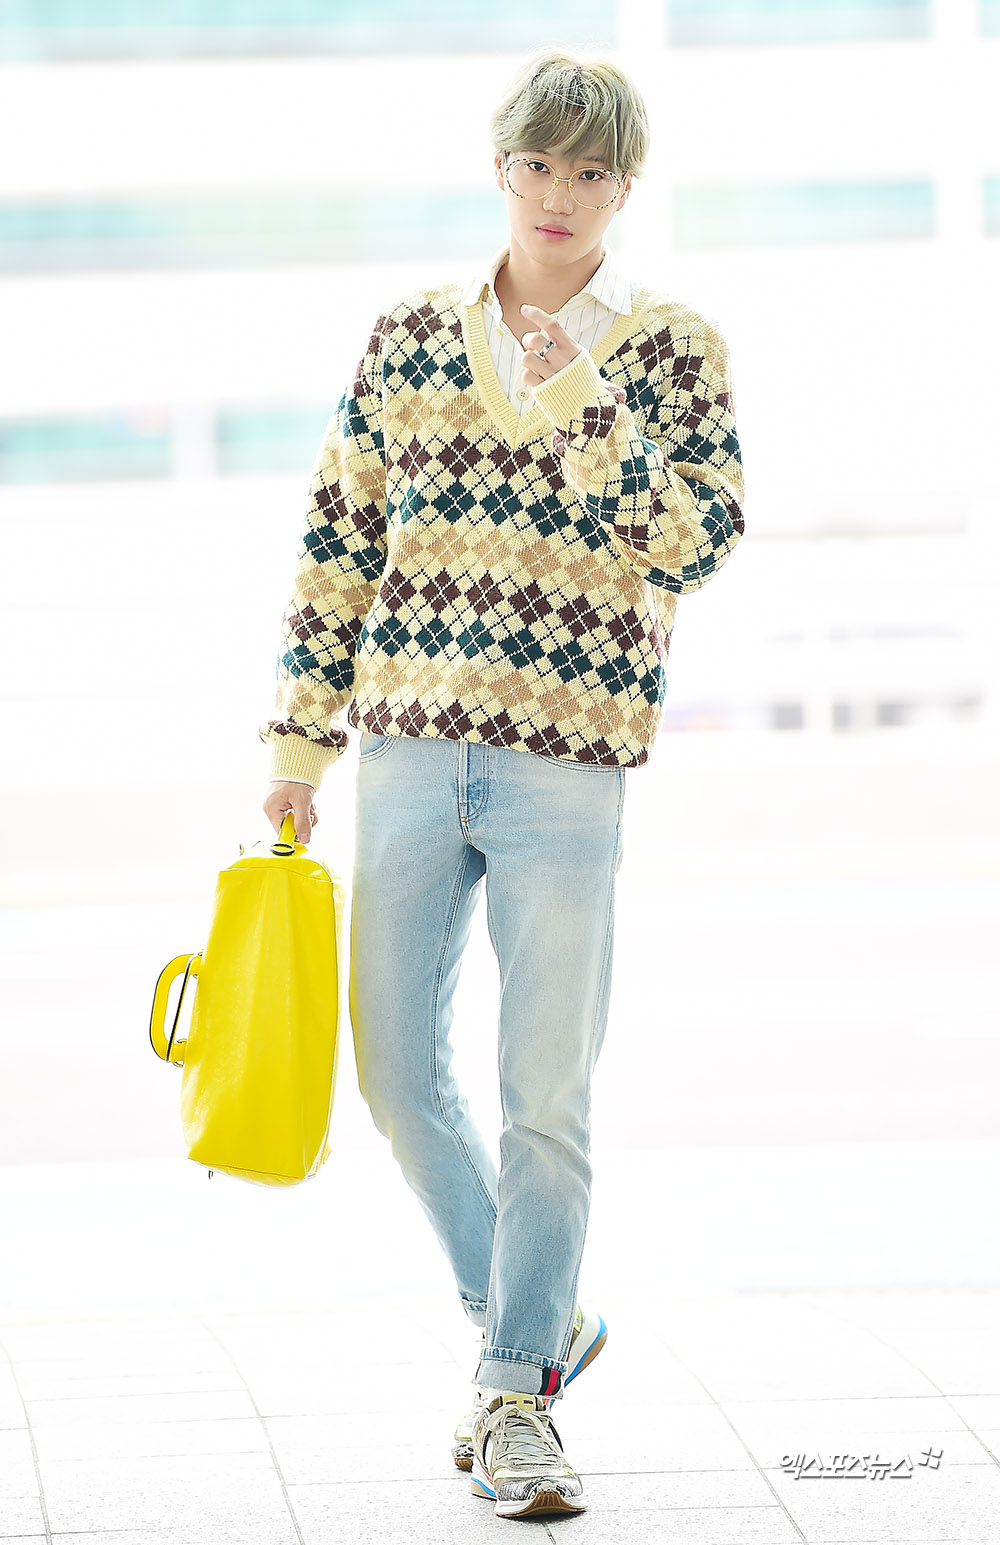 EXO Kai is departing into United States of America Los Angeles through Incheon International Airport on the morning of the 7th overseas schedule.